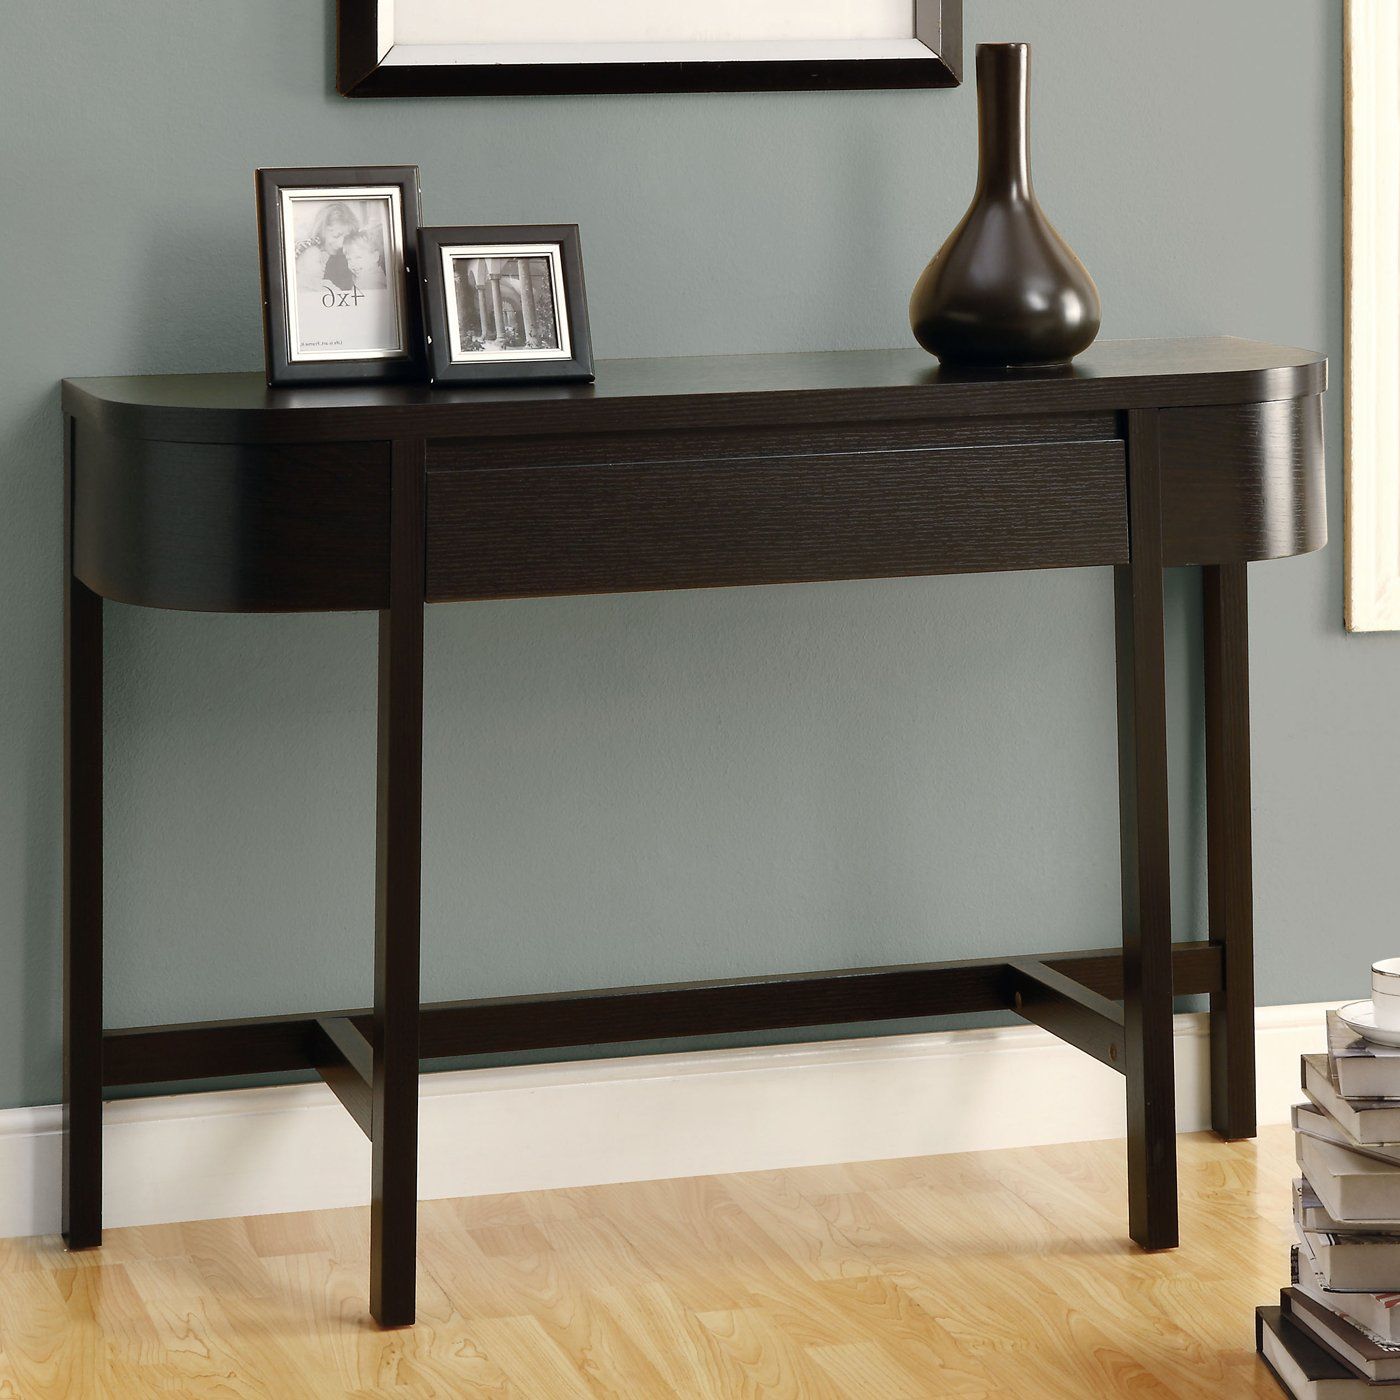 Slim Console Tables That Will Add The Sophistication Of Inside Square Modern Console Tables (View 8 of 20)